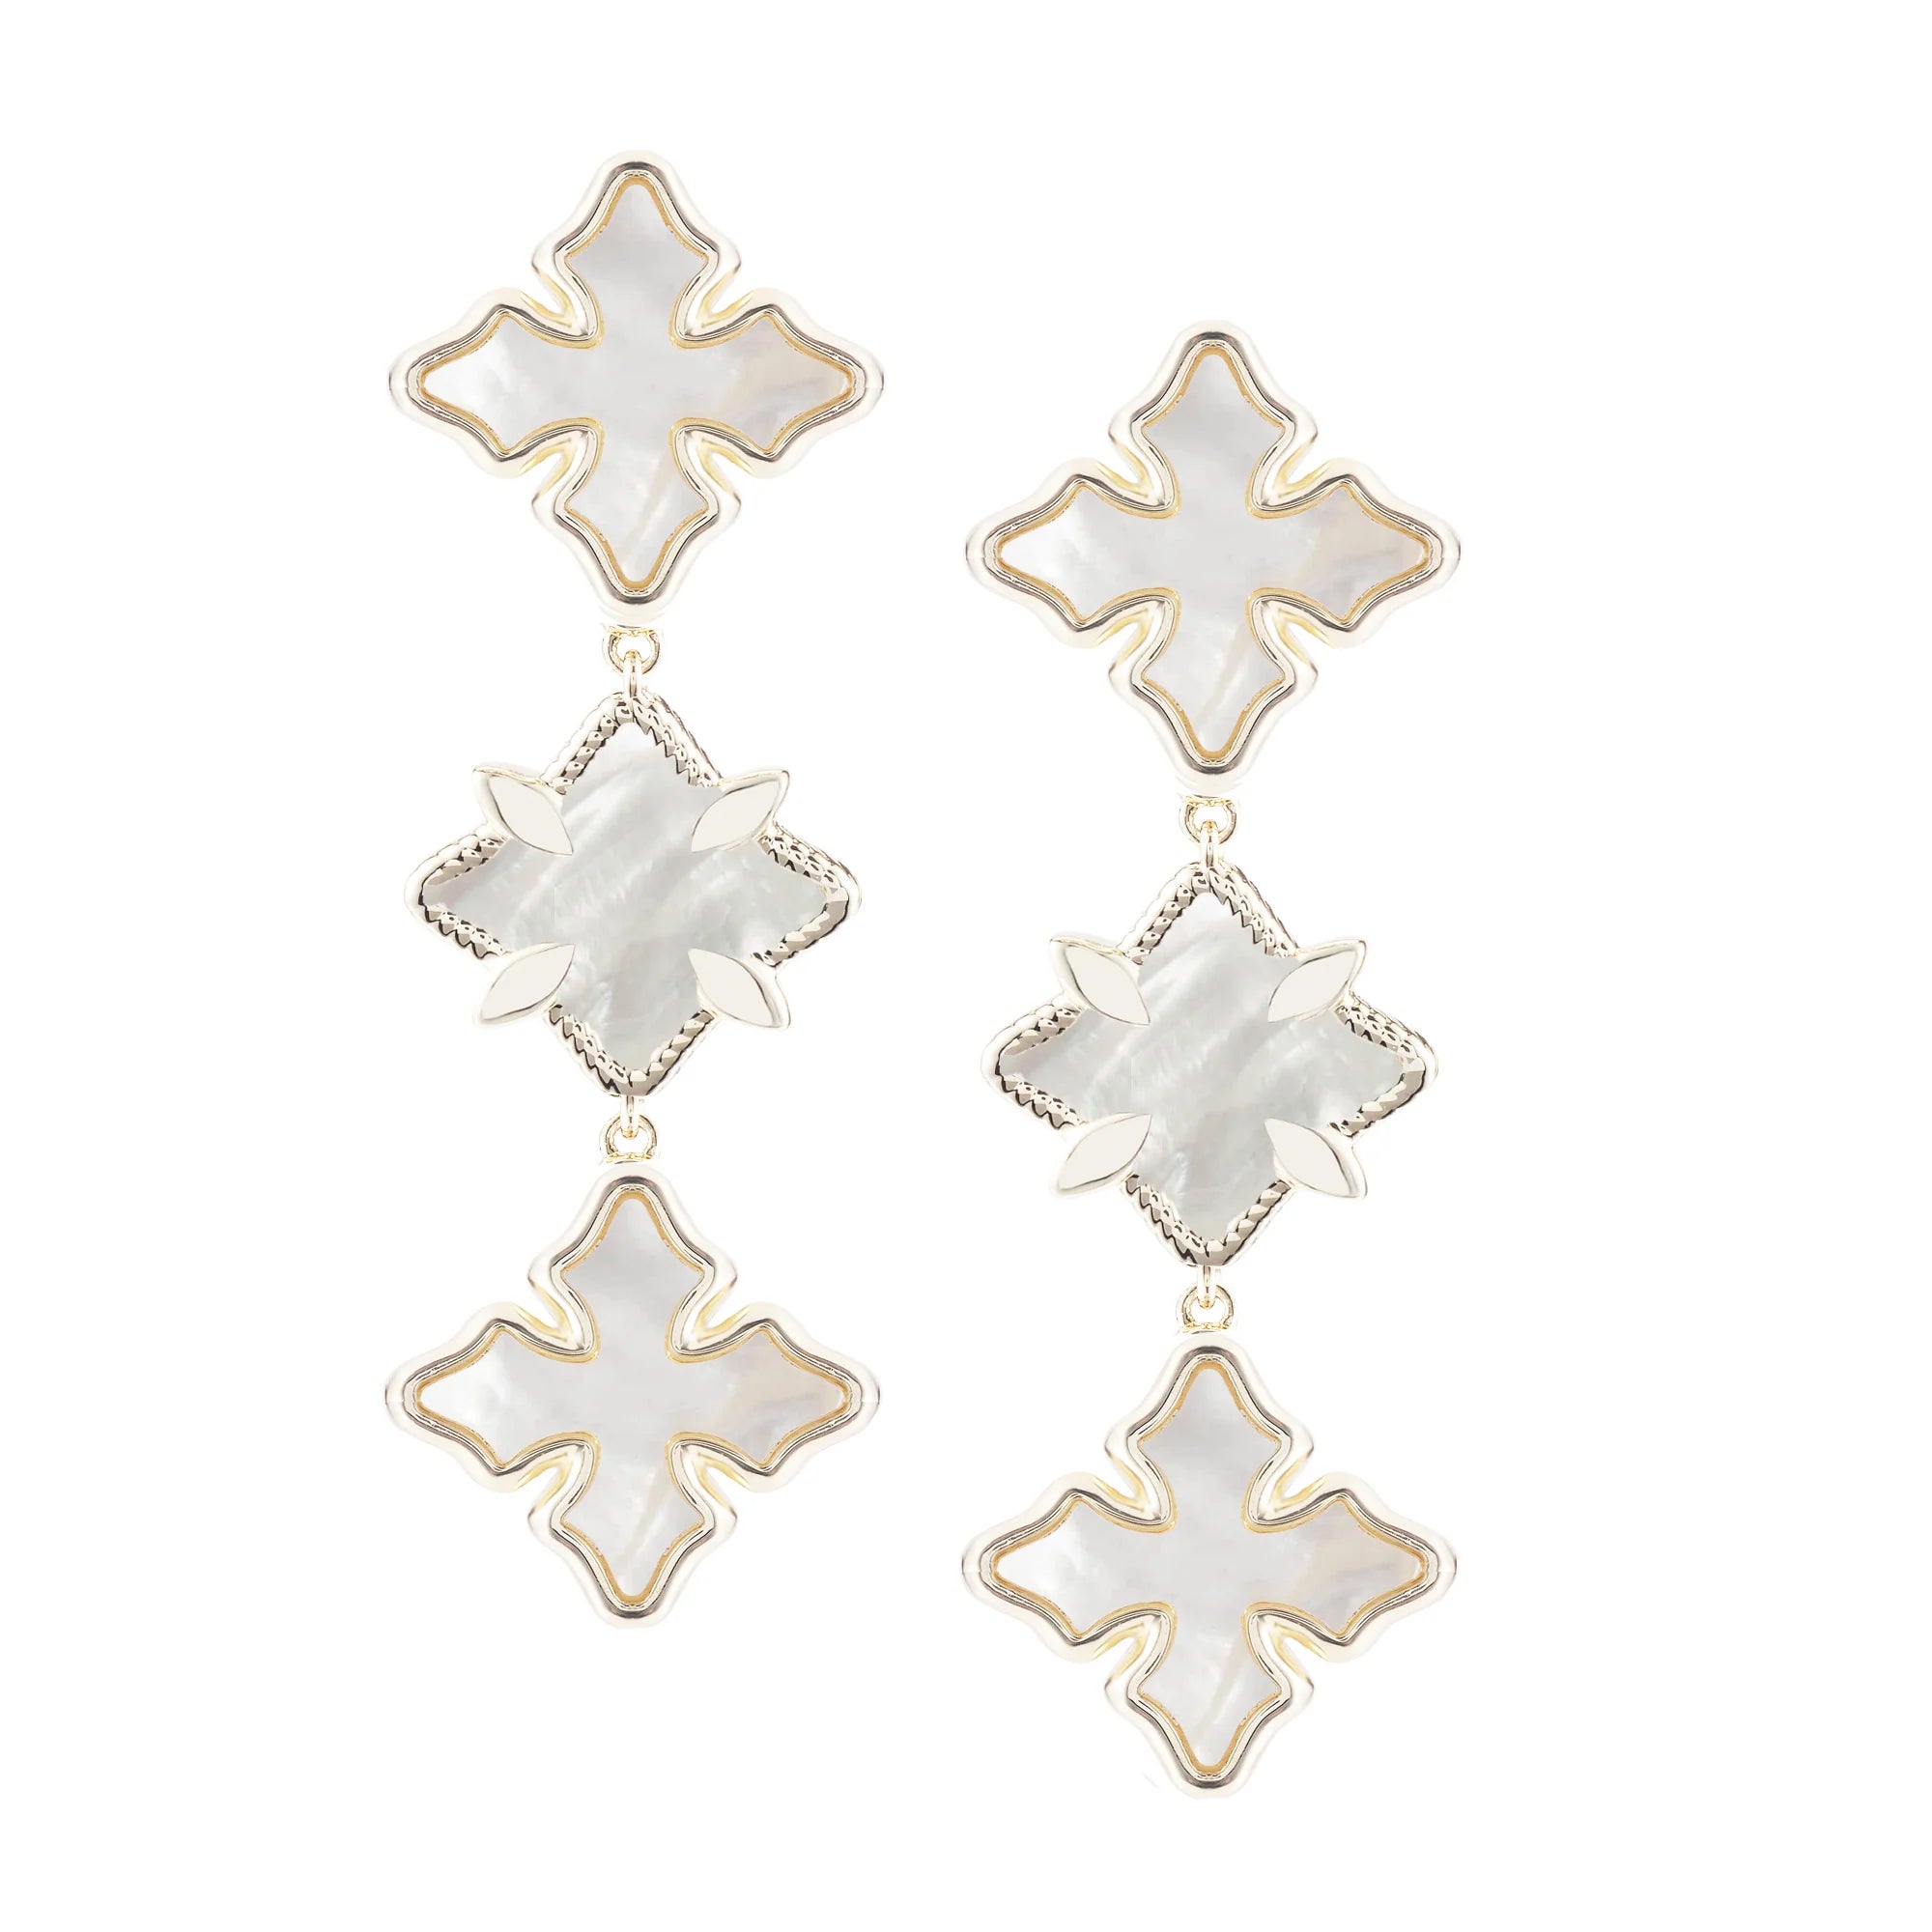 Natalie Wood - Cross Linear Statement Earrings Ivory Pearl/Gold-110 Jewelry & Hair-Natalie Wood-July & June Women's Fashion Boutique Located in San Antonio, Texas